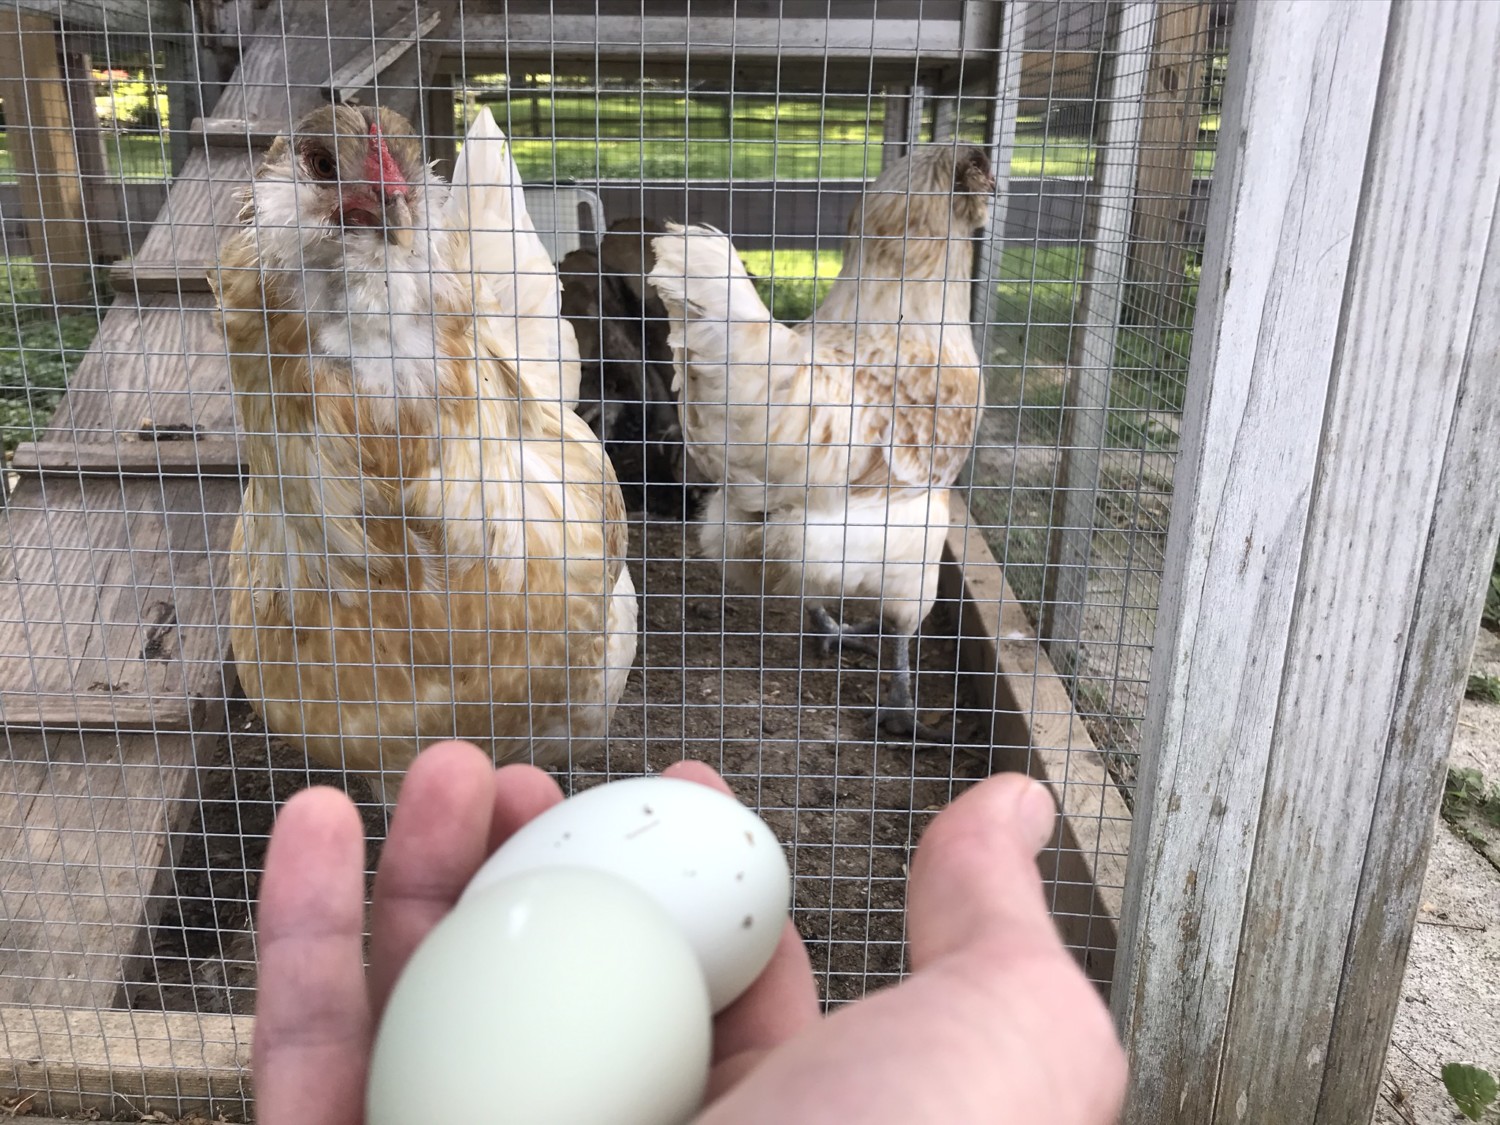 Gathering eggs from chickens